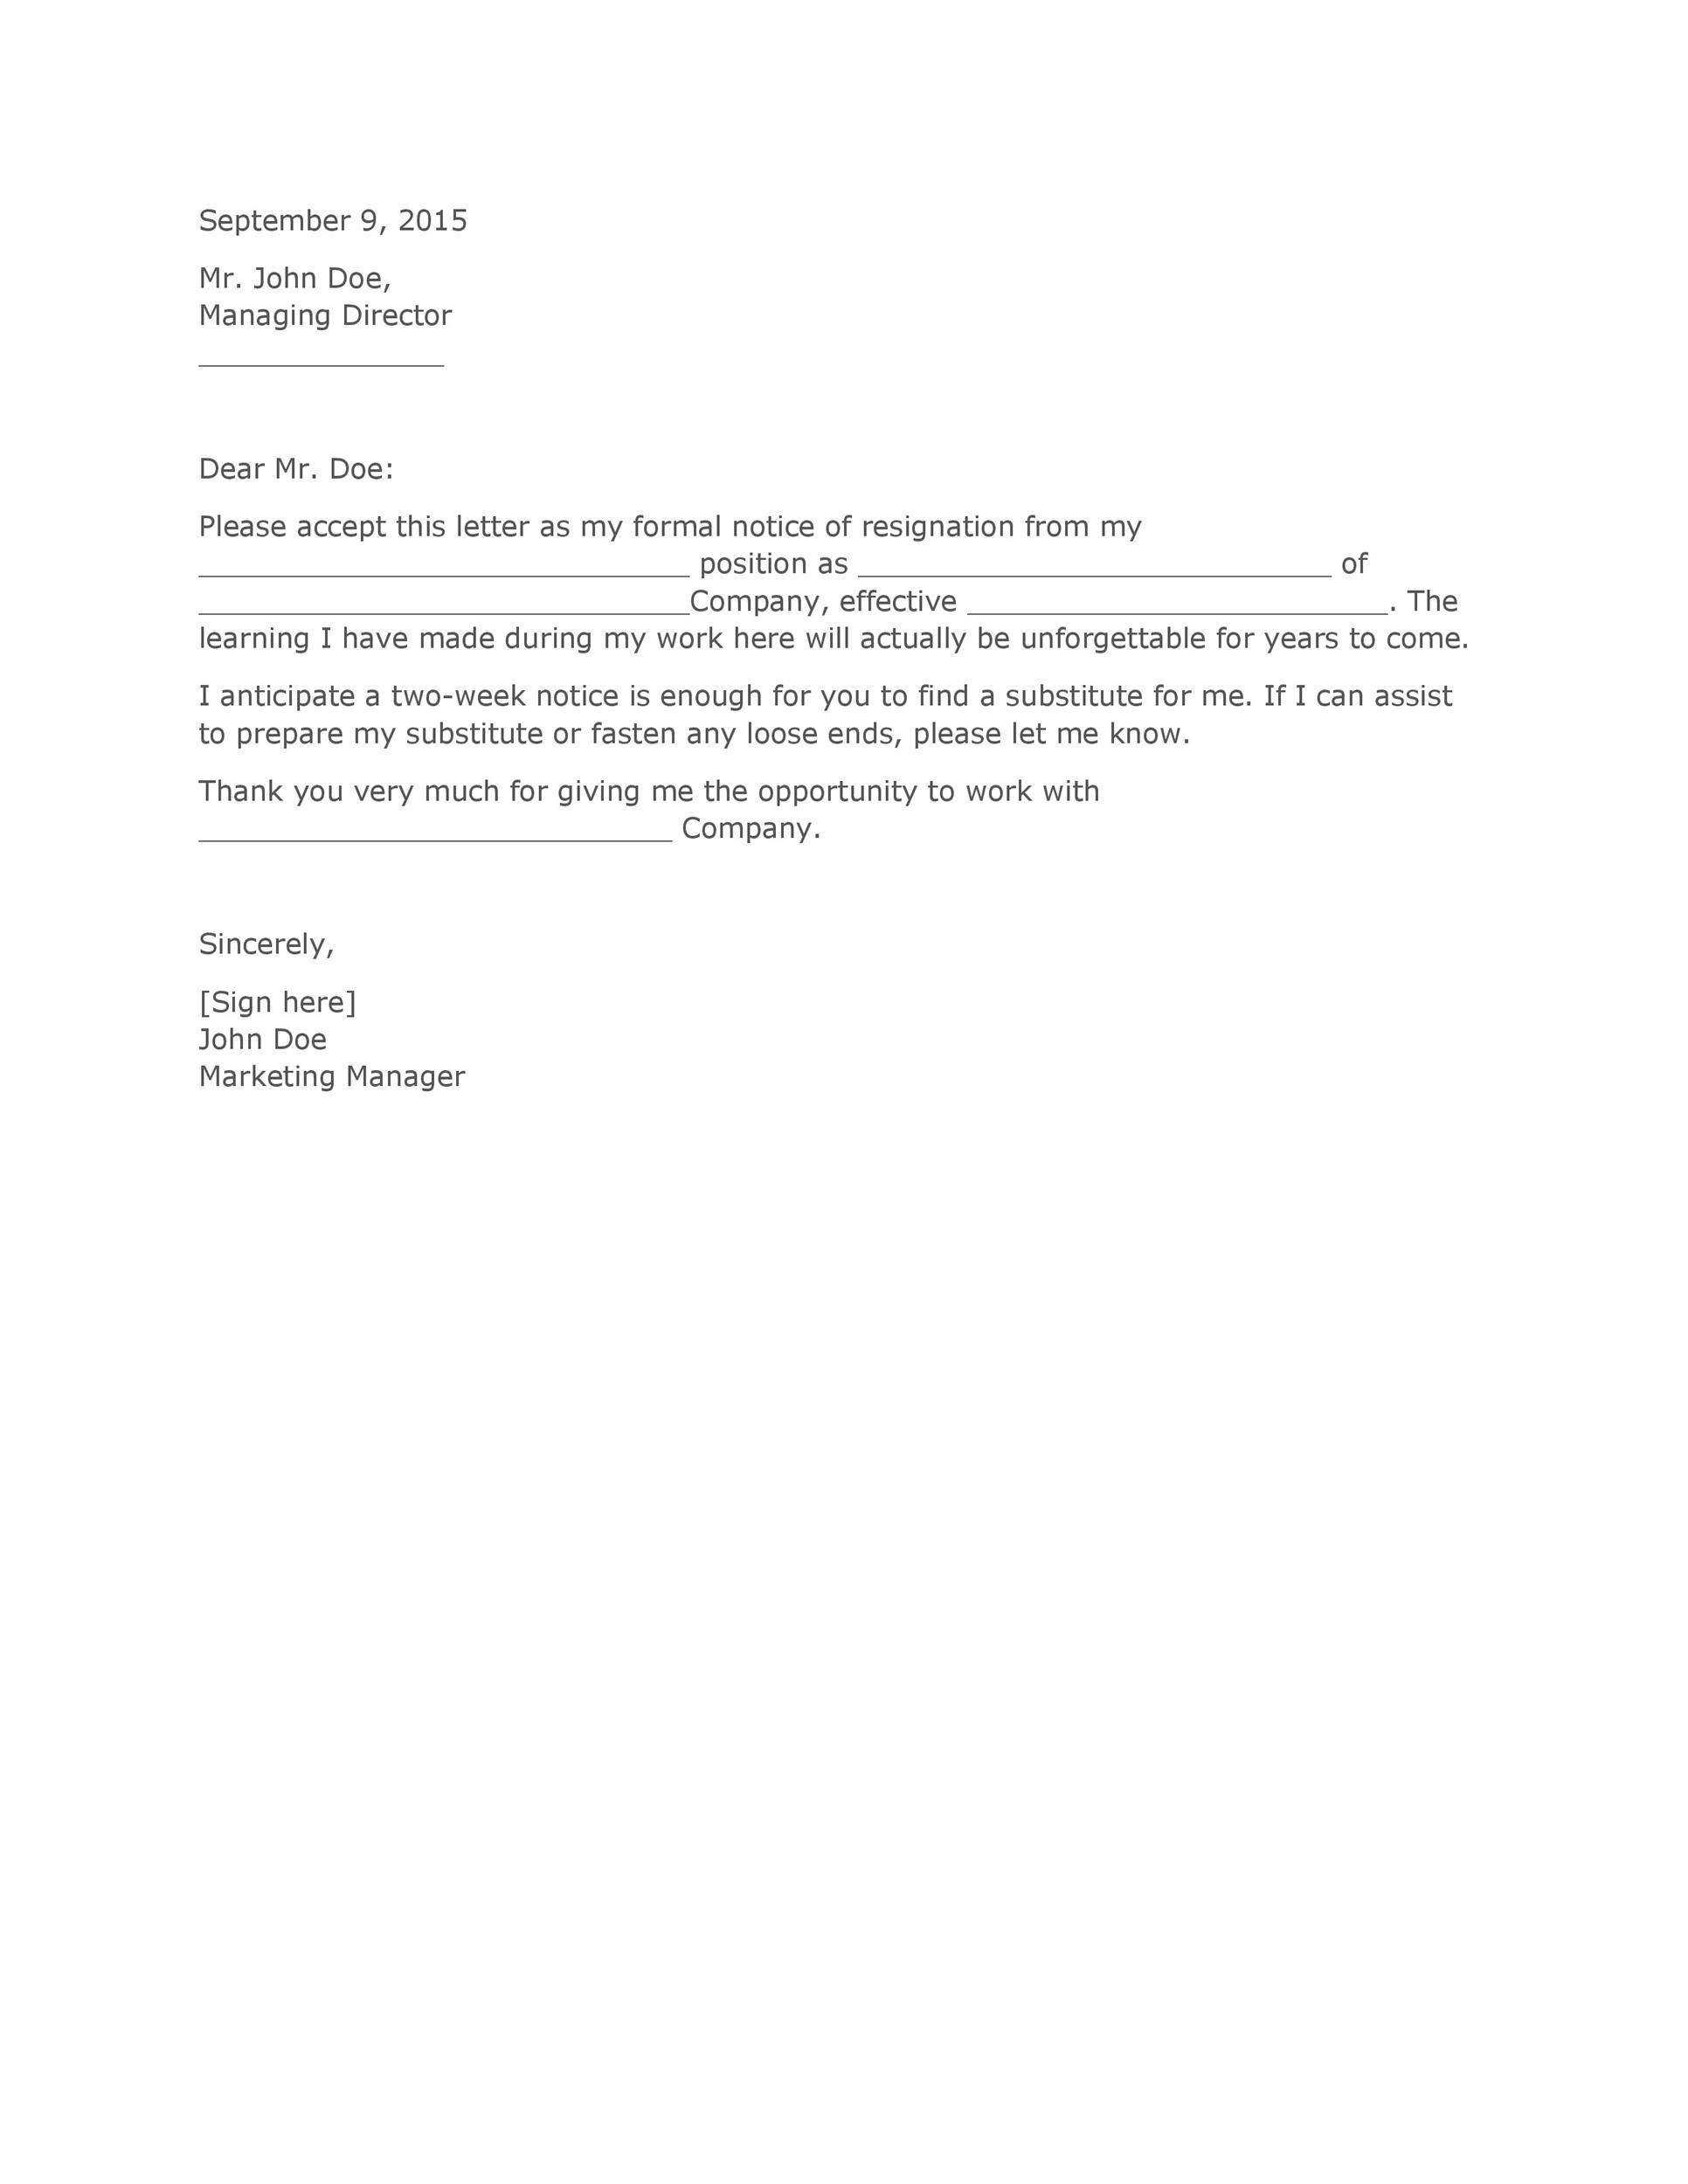 40 Two Weeks Notice Letters Resignation Letter Templates